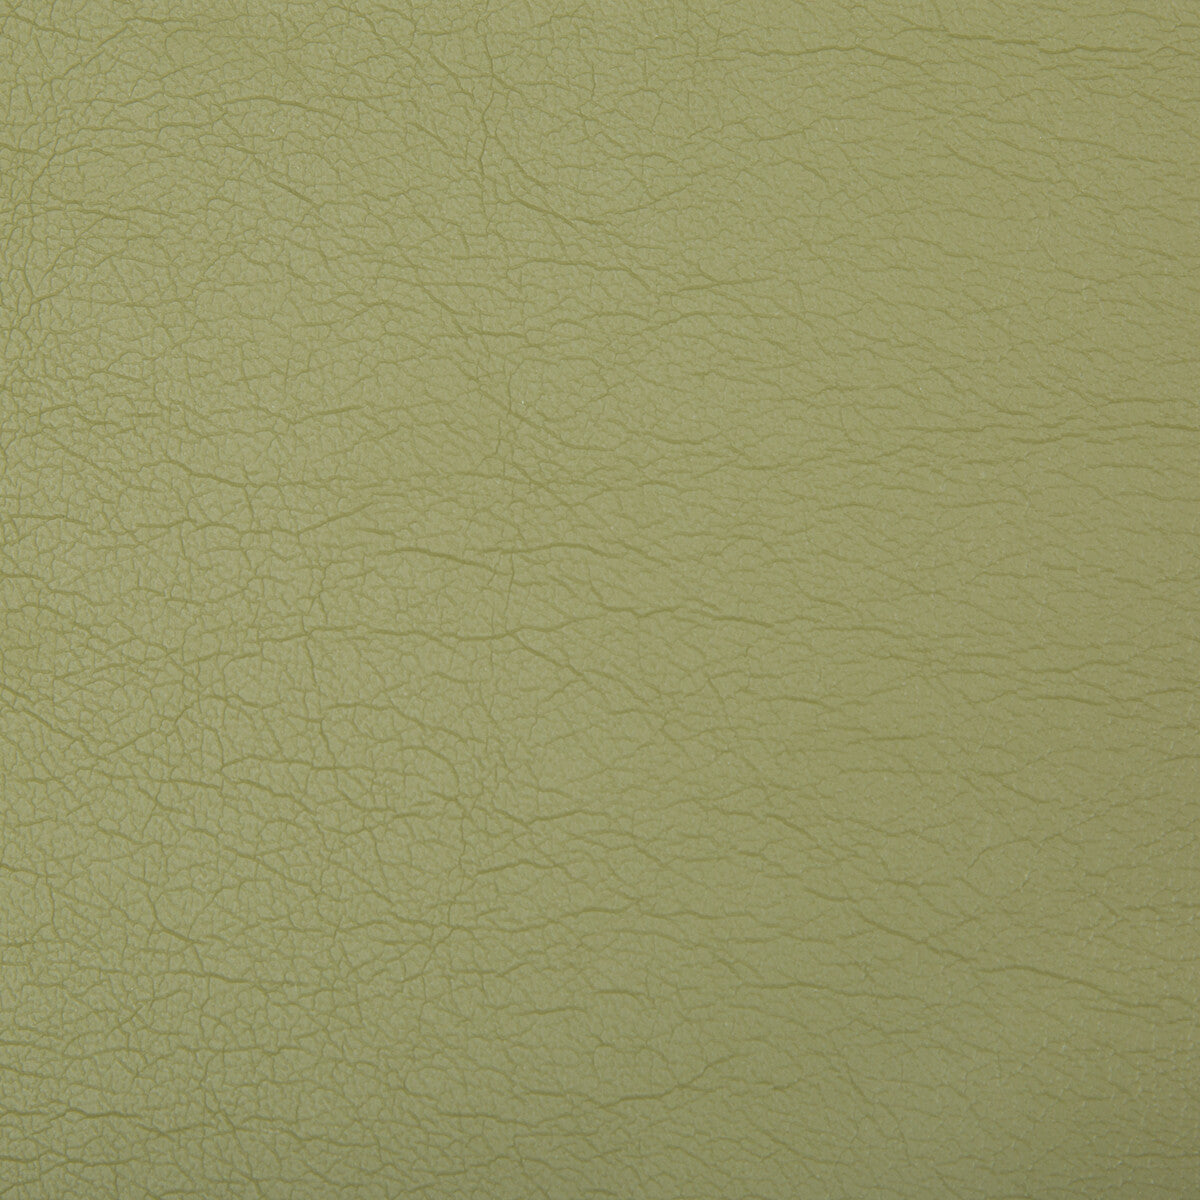 Optima fabric in green tea color - pattern OPTIMA.130.0 - by Kravet Contract